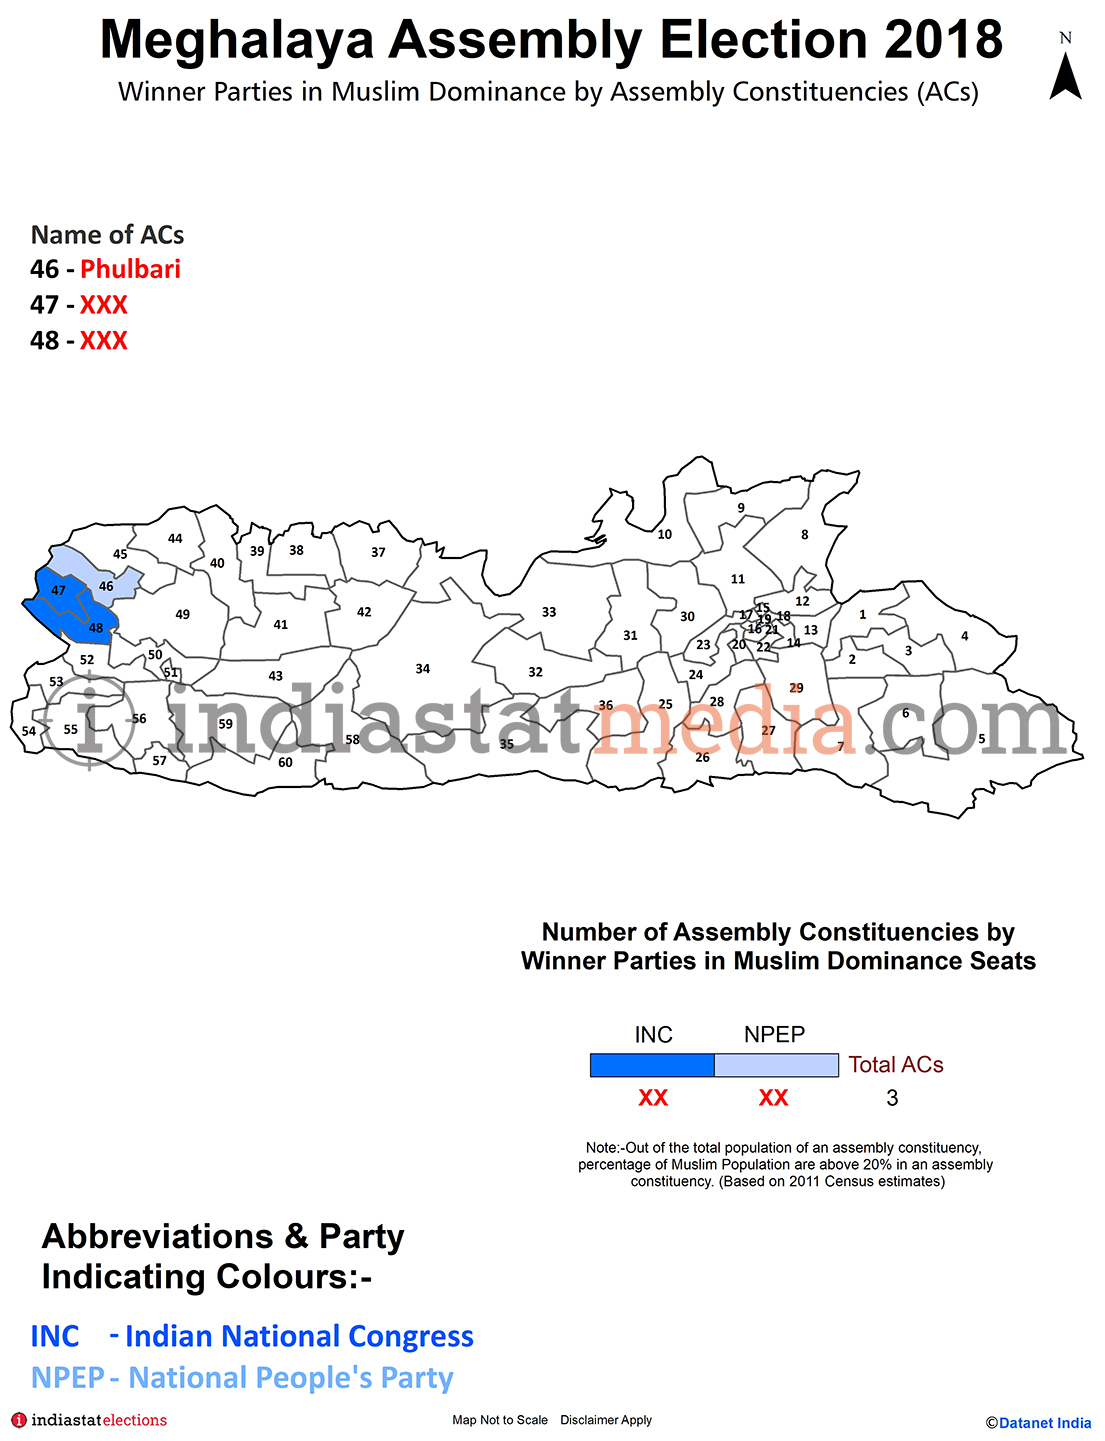 Winner Parties in Muslim Dominance by Constituencies in Meghalaya (Assembly Election - 2018)